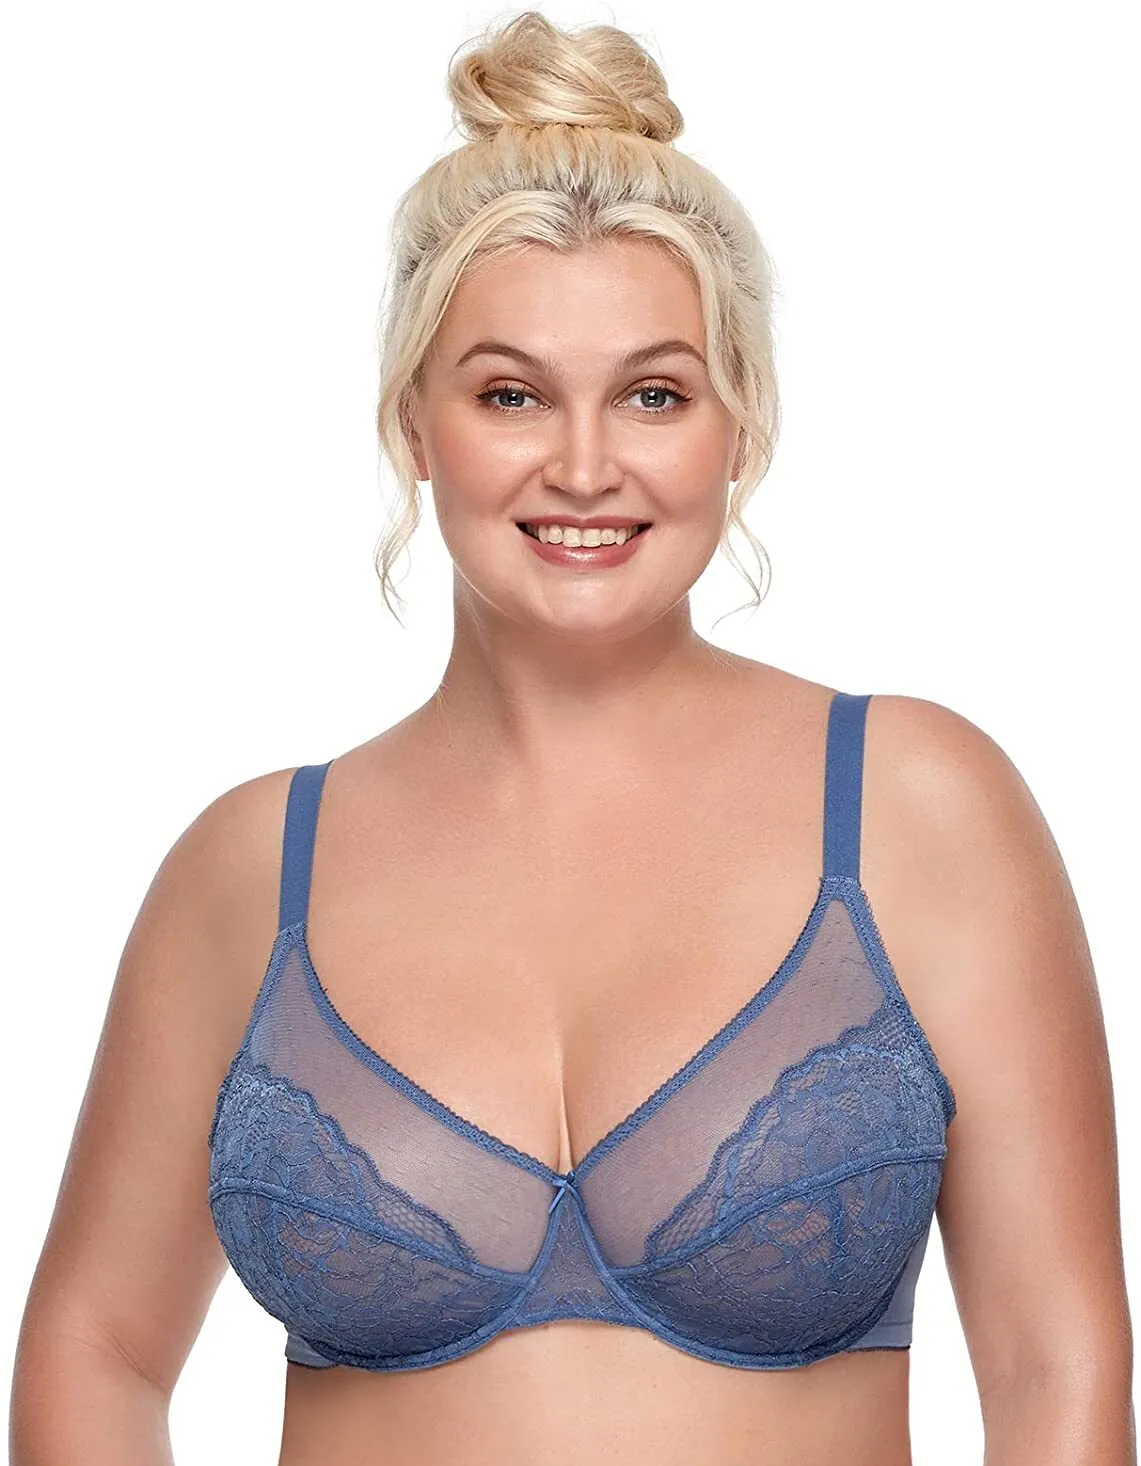 LEEy-world Plus Size Lingerie Wo No Show Seamless Underwear, Amazing  Stretch & No Panty Lines, Available in Plus Size,I 